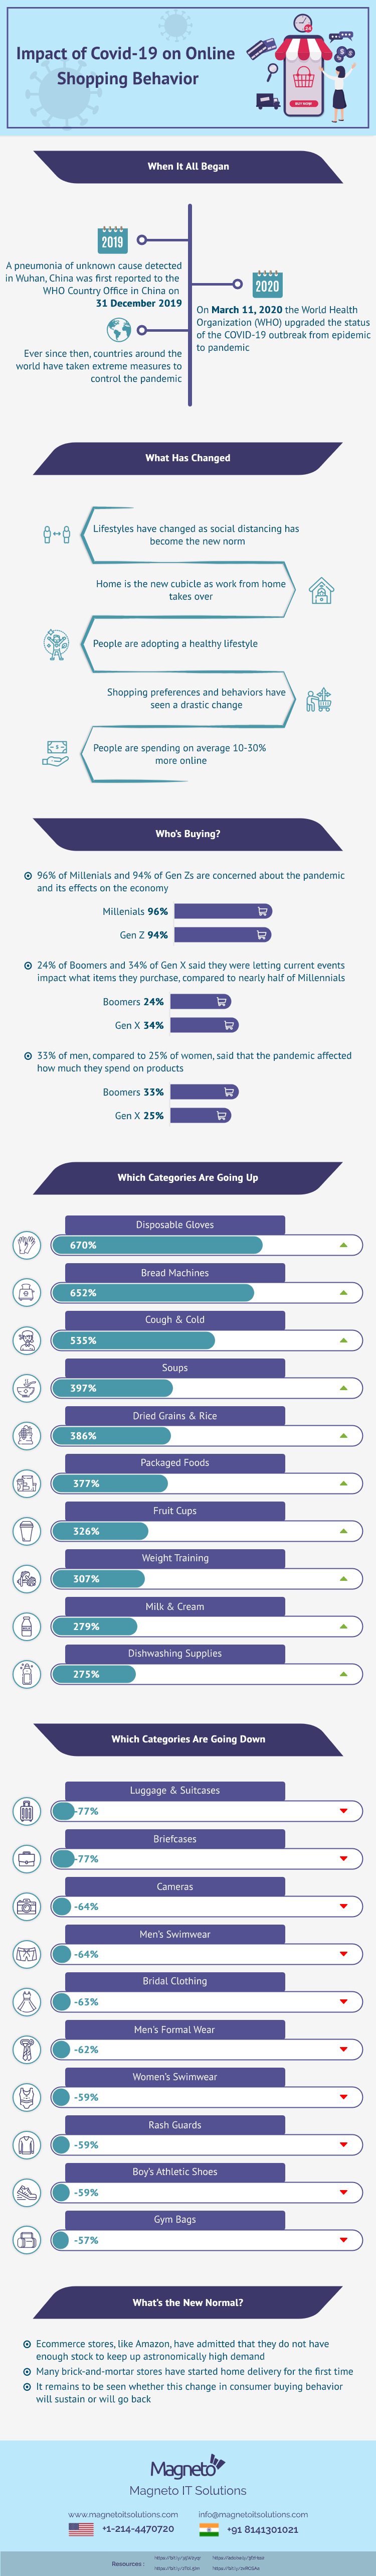 Future Of m-commerce_infographic with statistcs